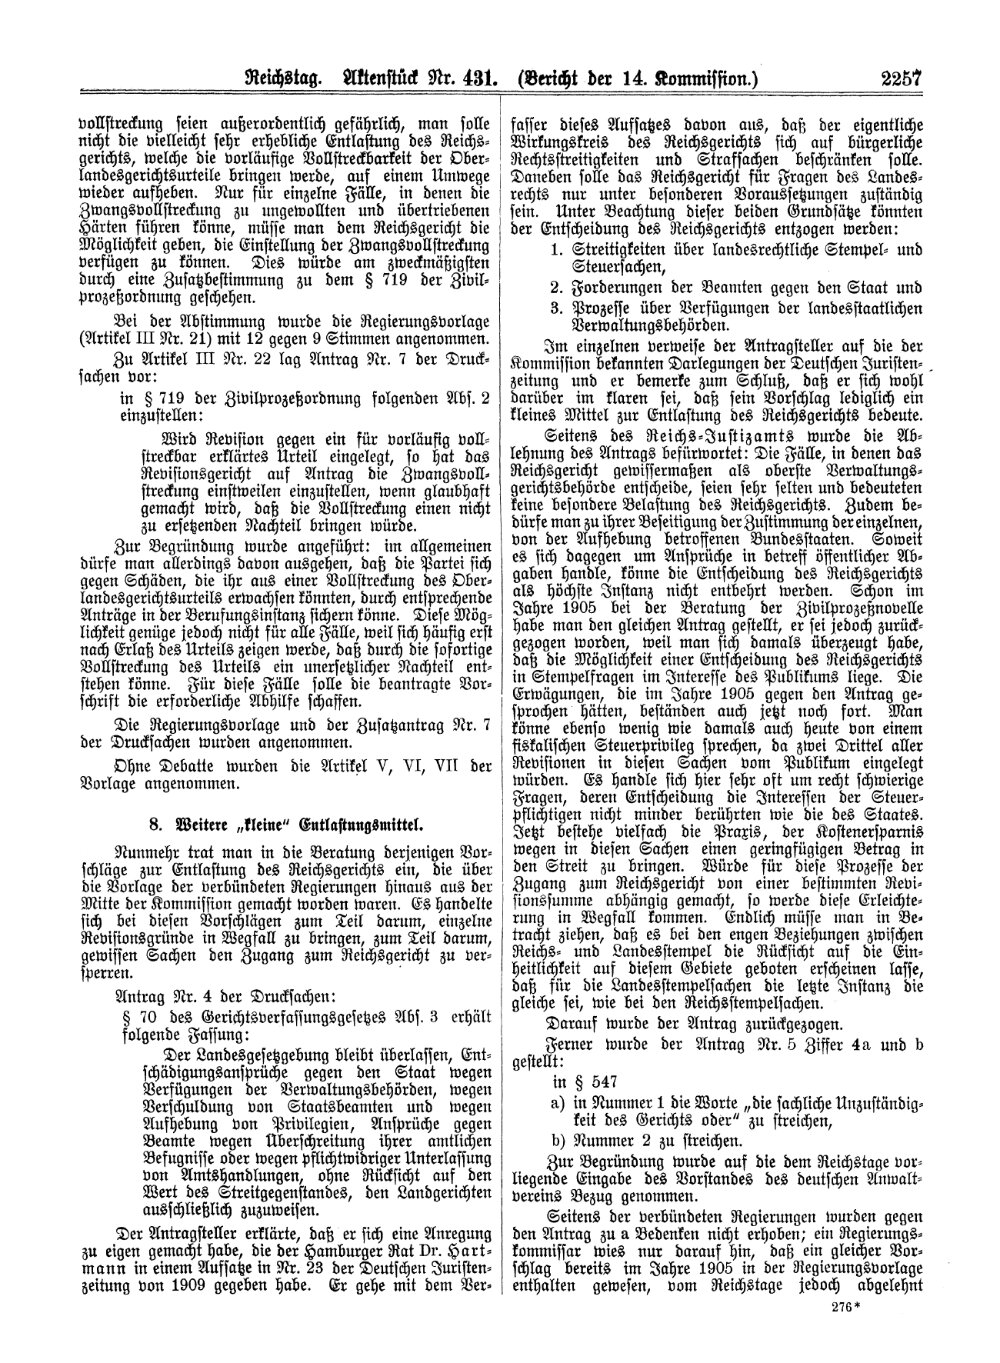 Scan of page 2257